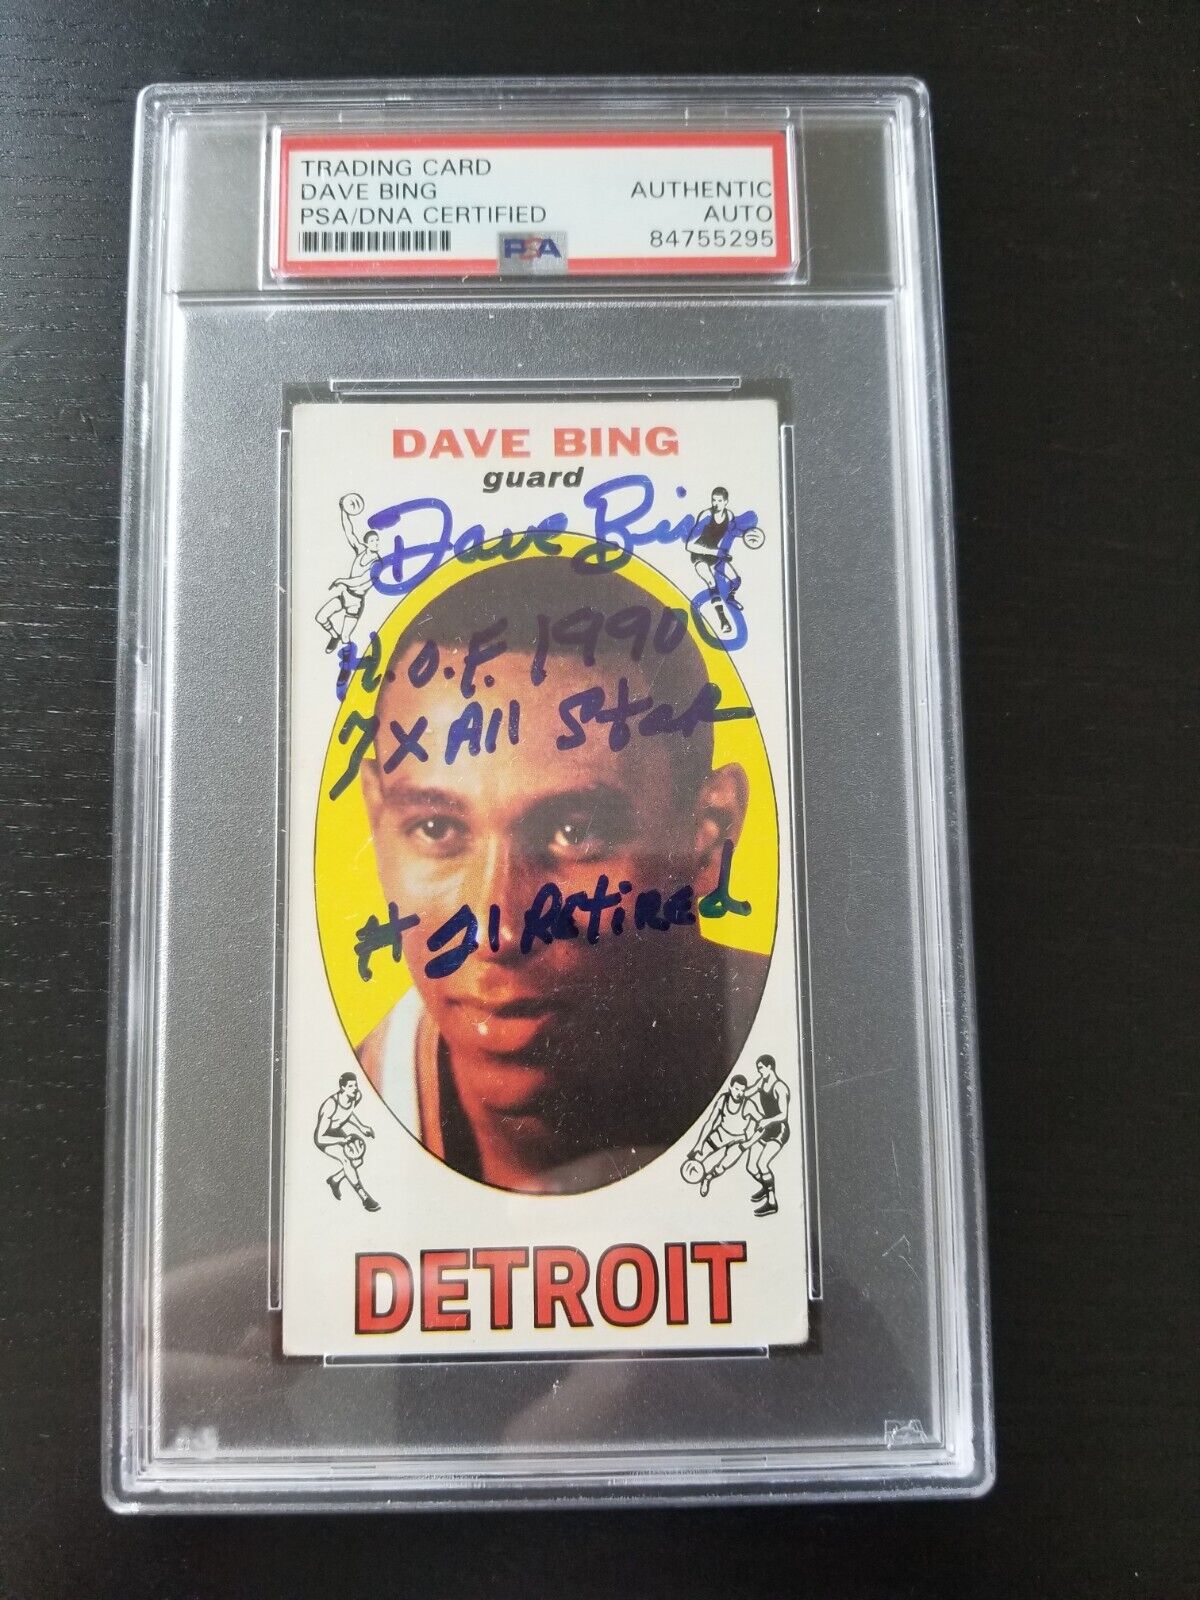 Dave Bing Signed 1969 Topps Rookie Auto PSA/DNA Certified Autographed Card